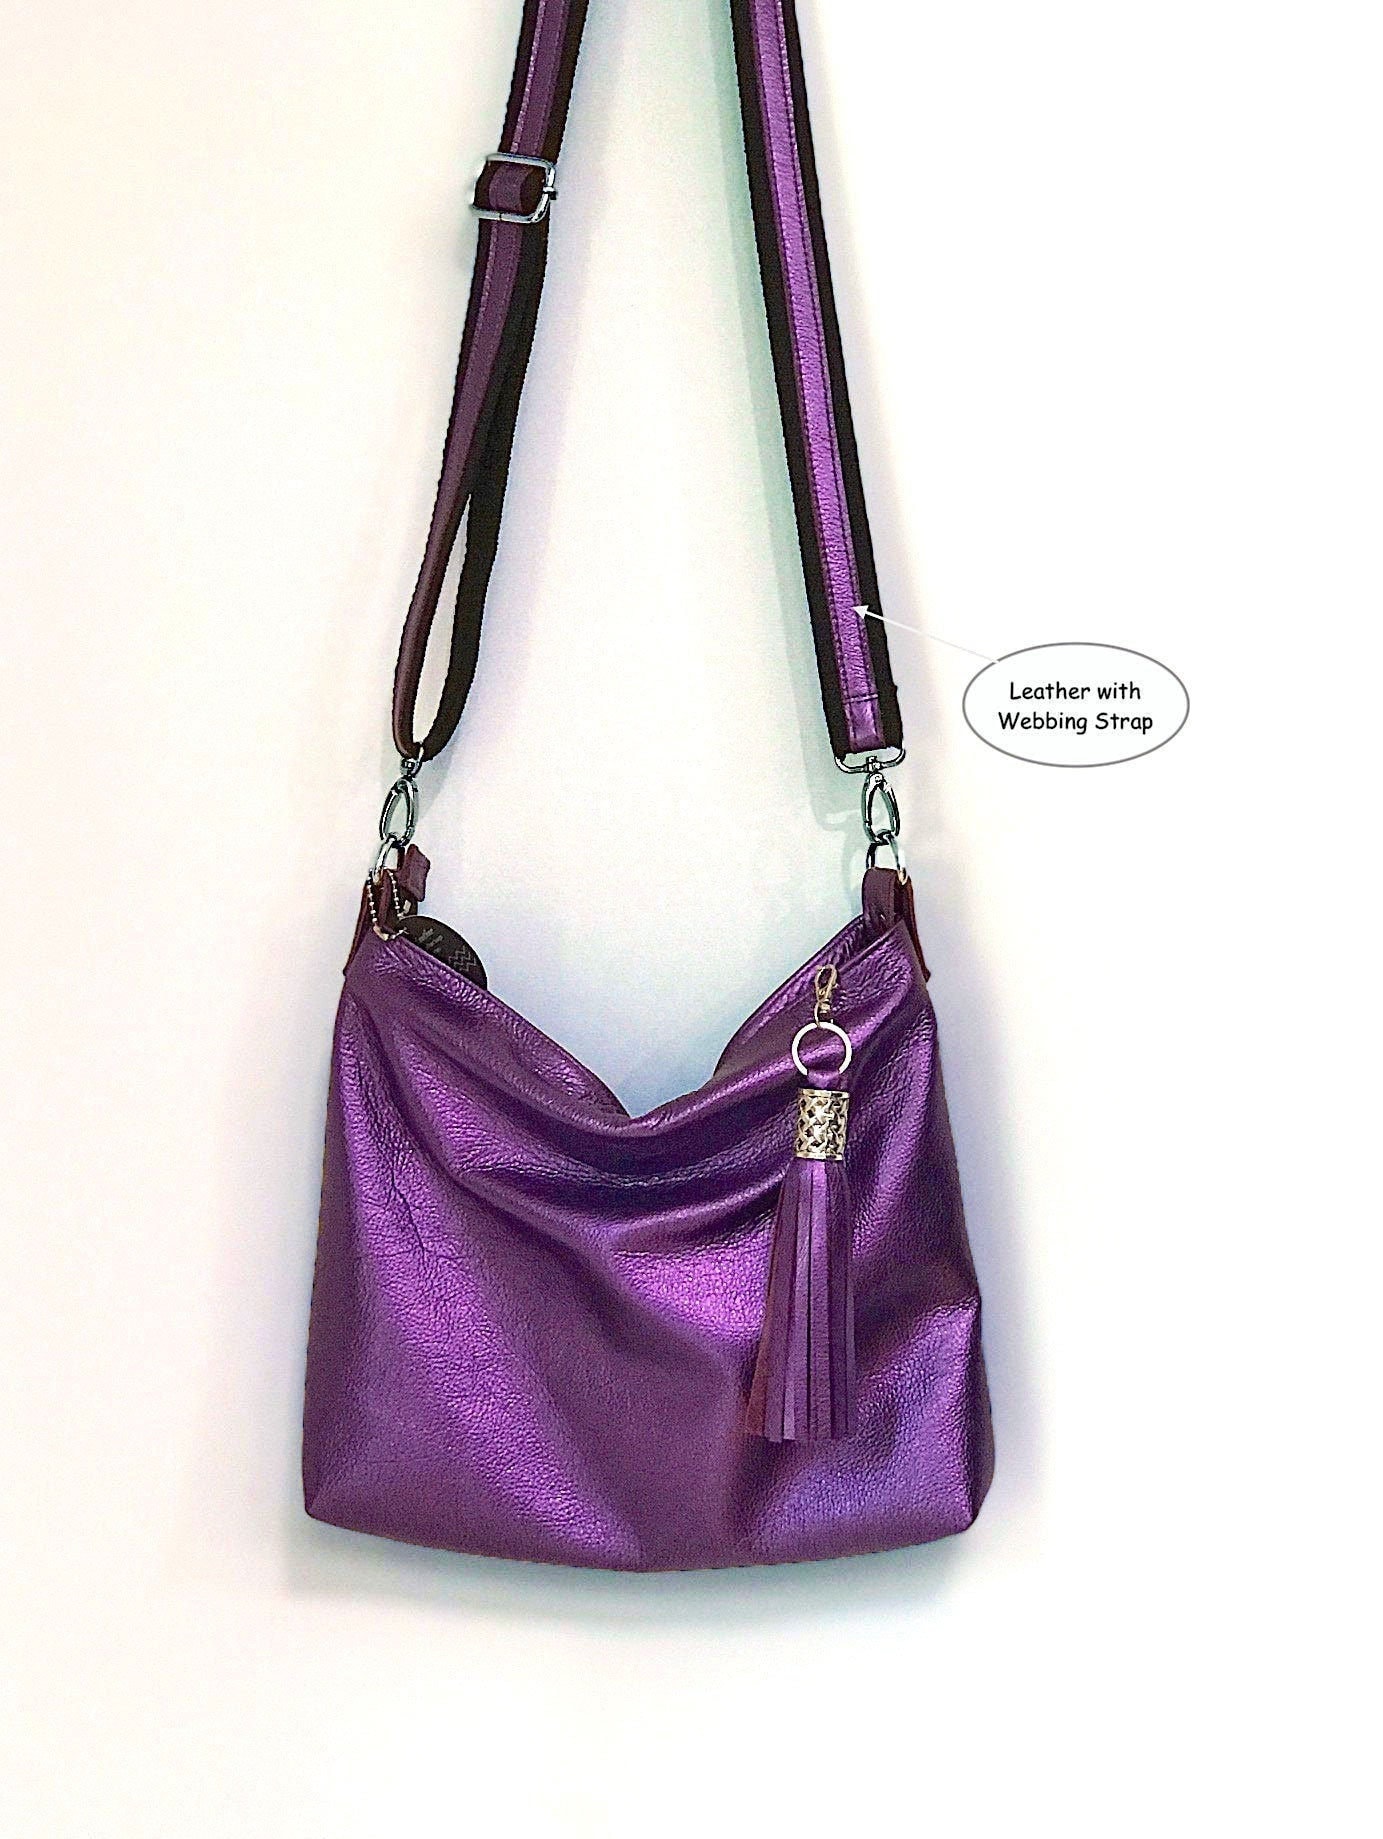 Leather Tote Bag: Purple Cheaha Mini Tote | leather bags by KMM & Co.